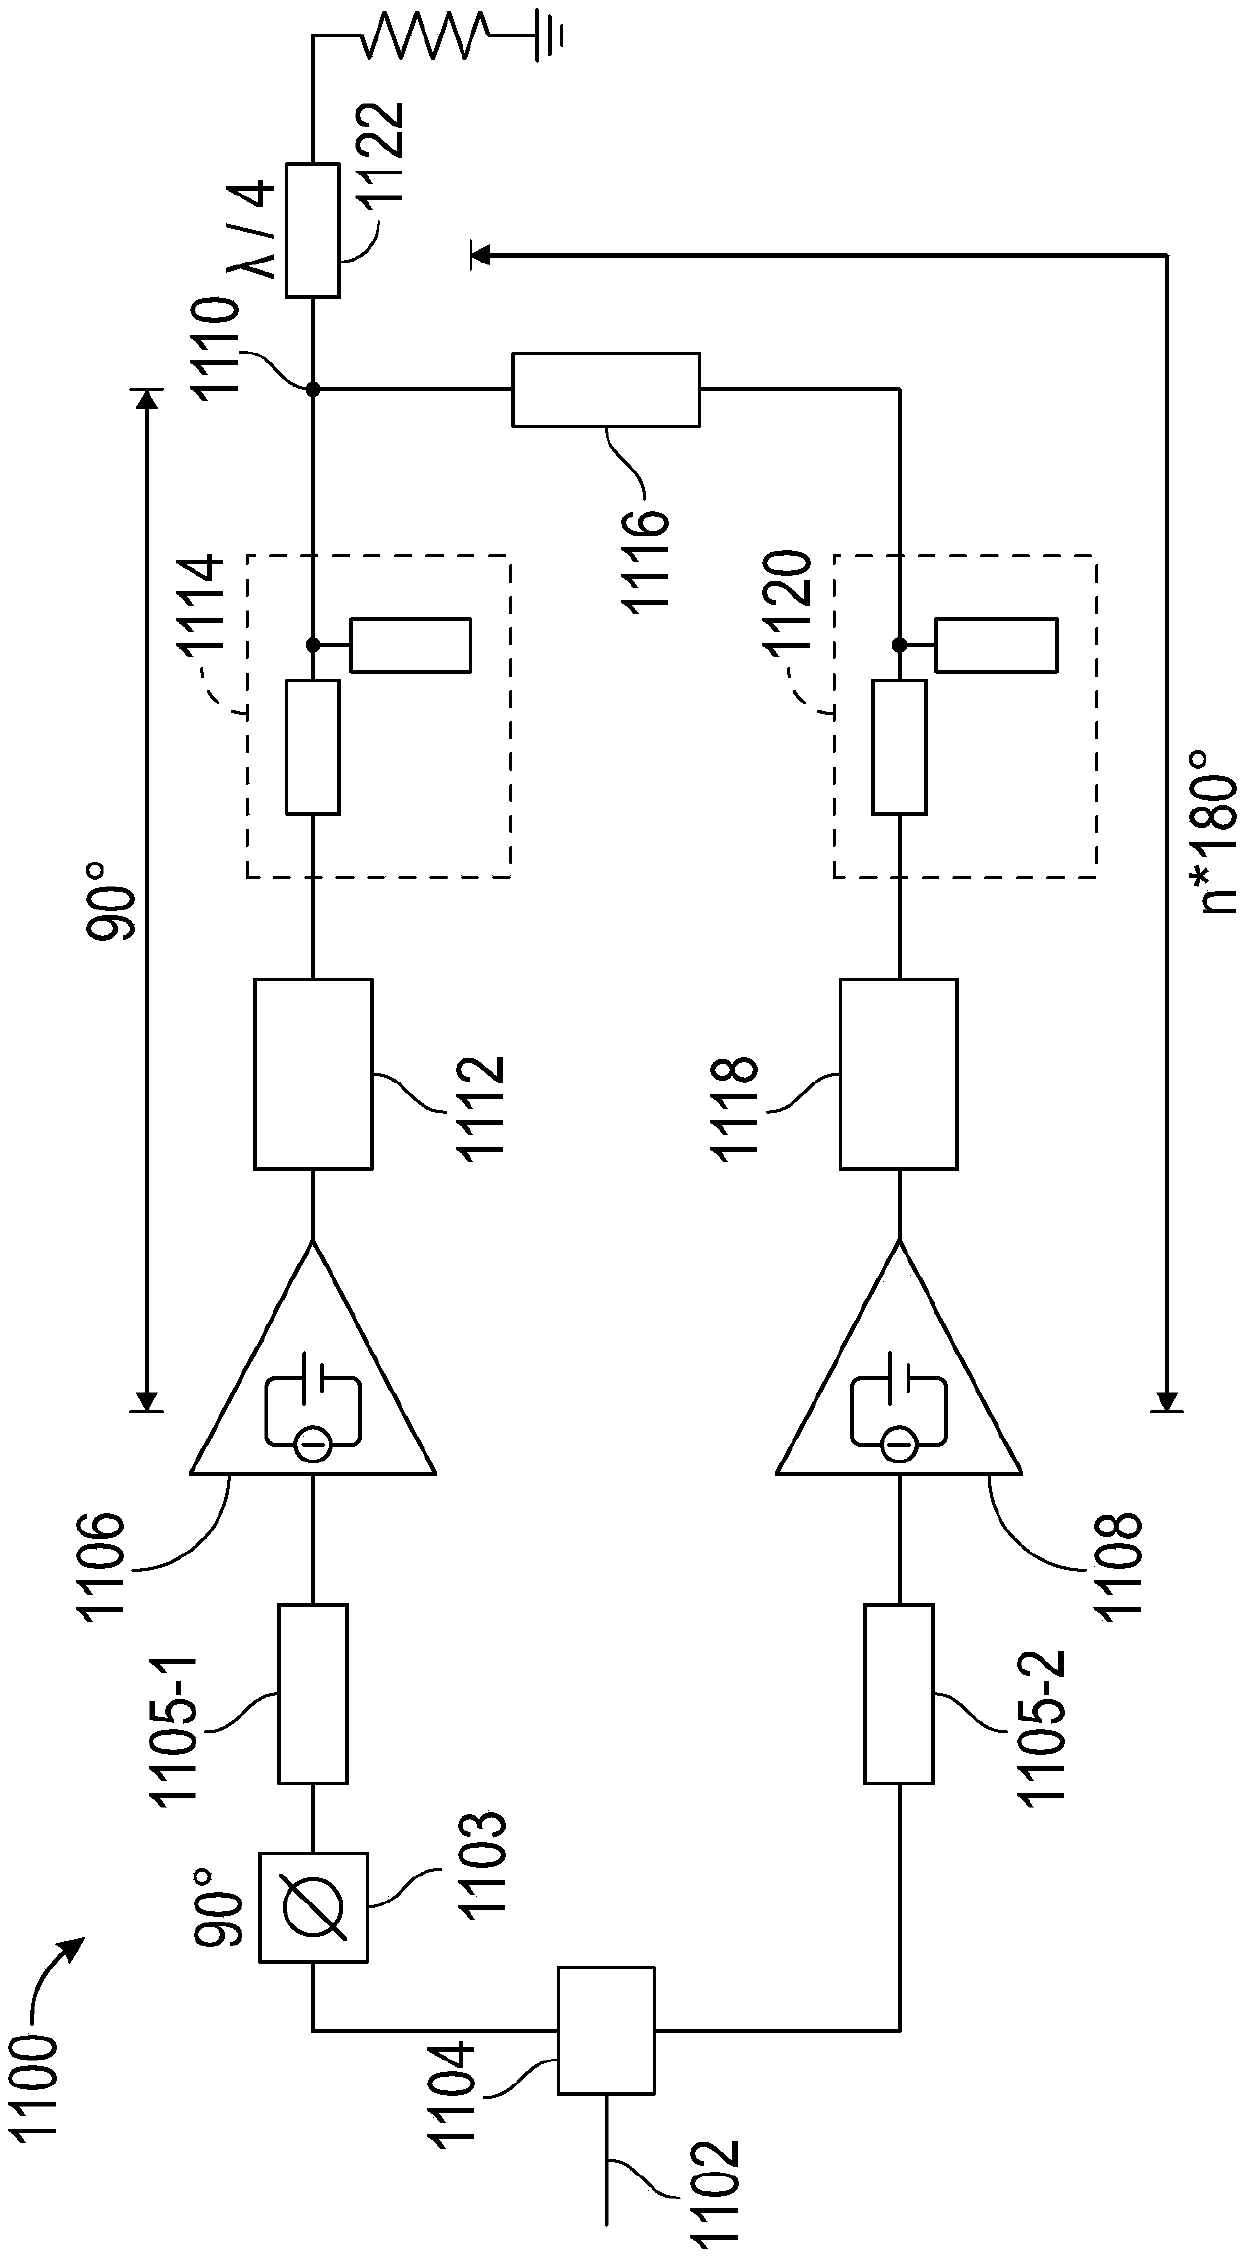 Wideband power amplifiers with harmonic traps